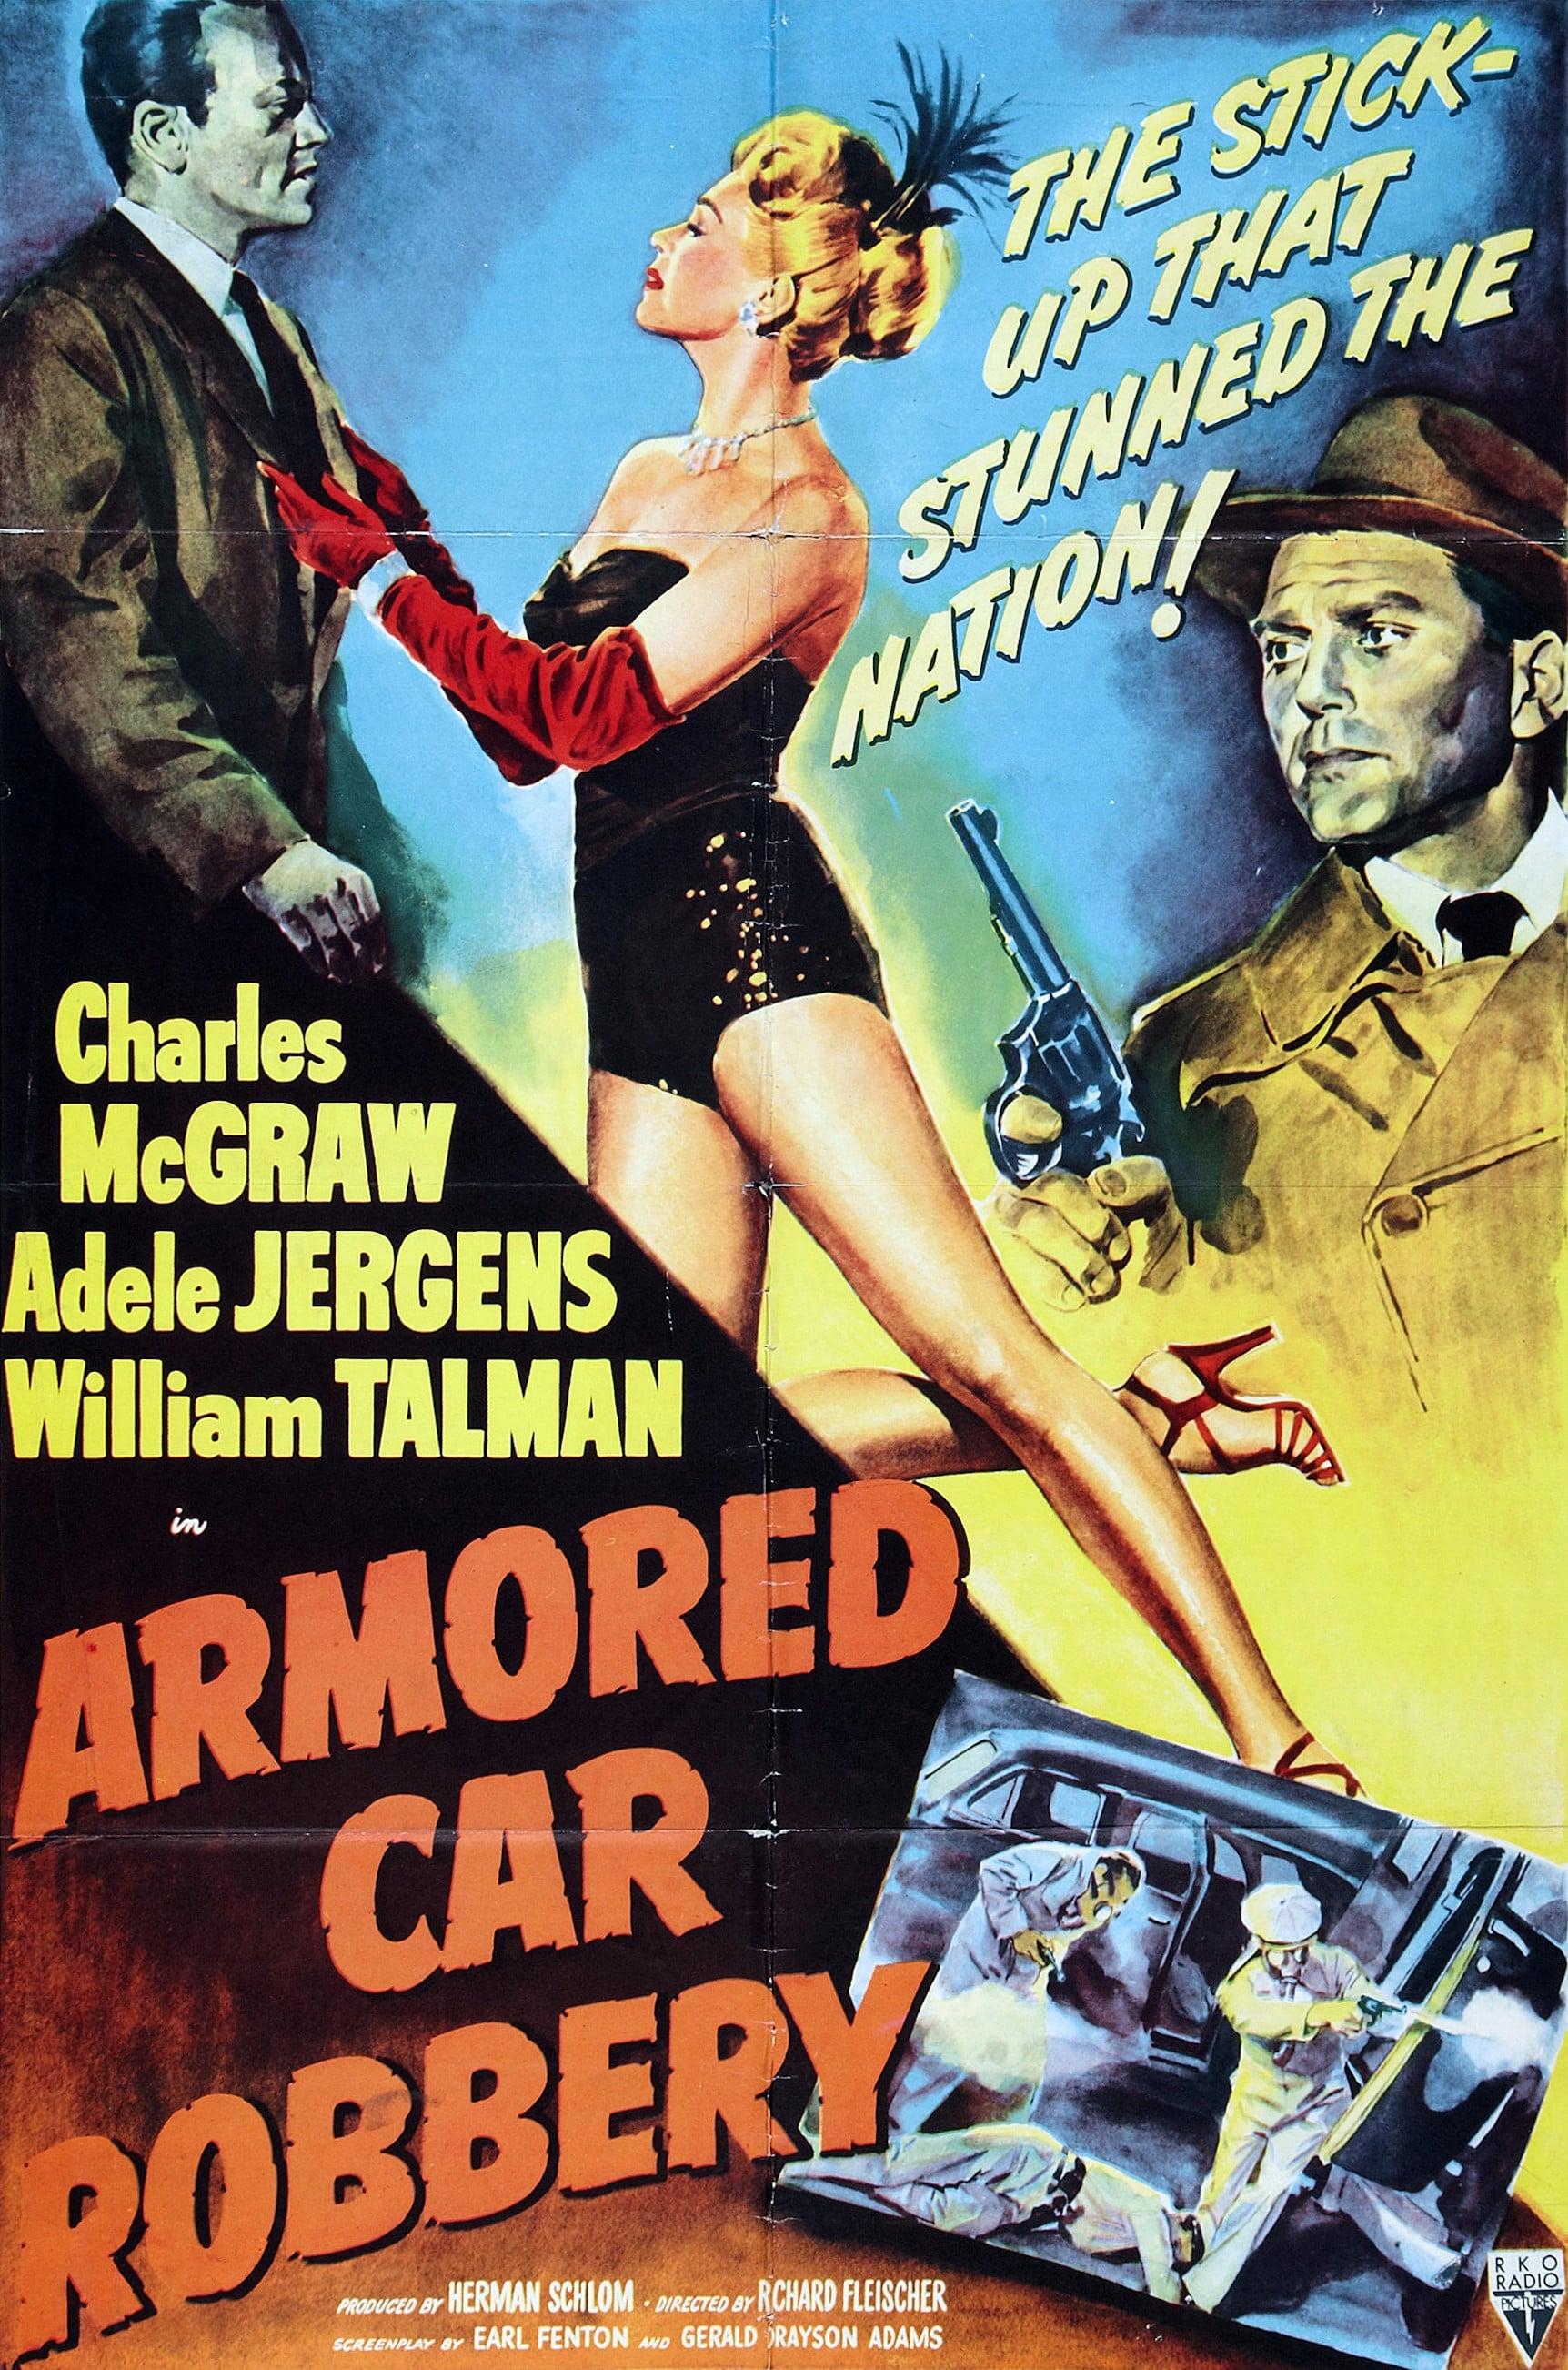 Armored Car Robbery poster